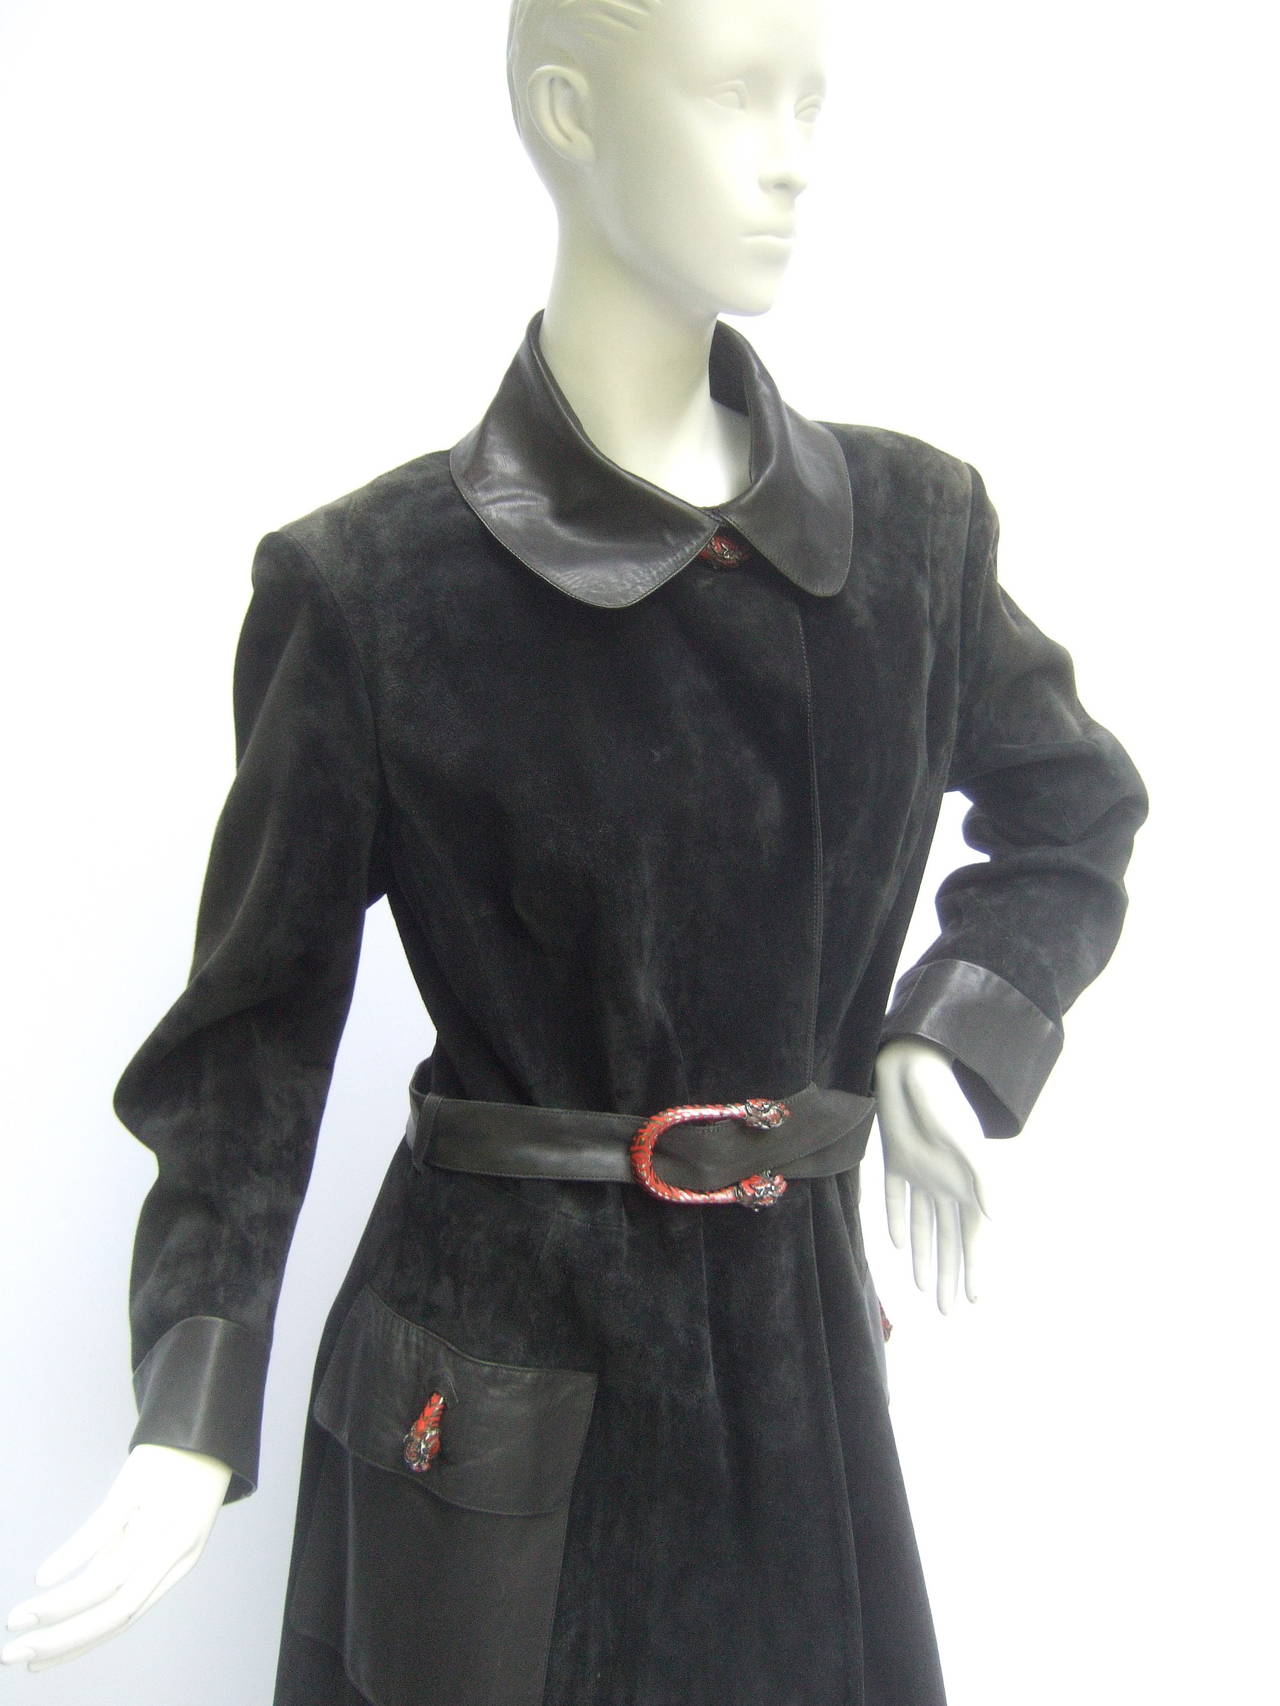 Gucci Sleek black doeskin suede trench coat with sterling silver tiger buckle & buttons. The stunning coat is plush doeskin suede contrasted with buttery soft black leather cuffs, belt, collar, & deep patch pockets
  
The rare Gucci coat is